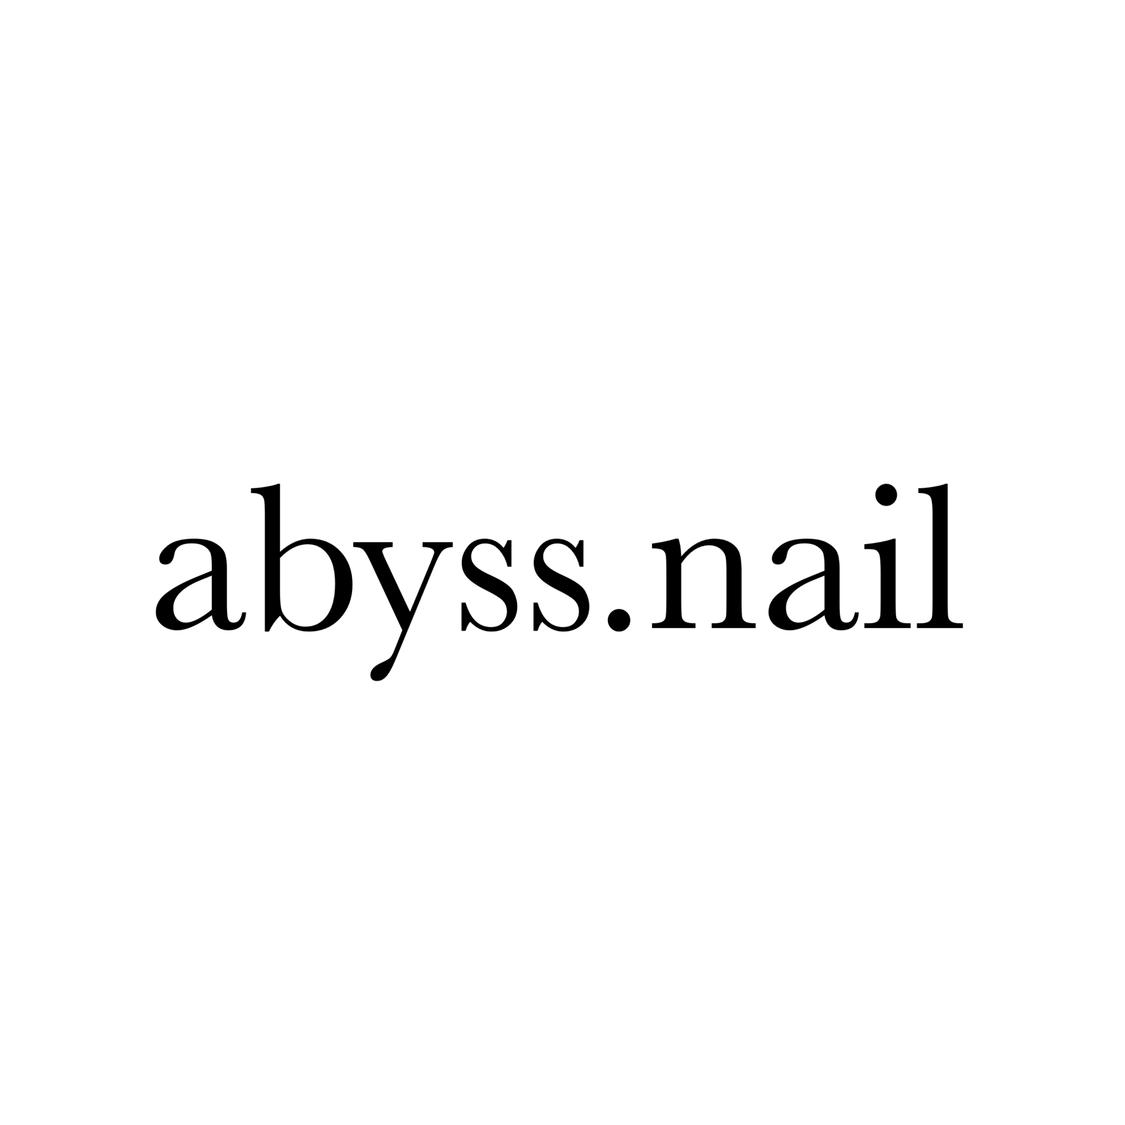 abyss.nail